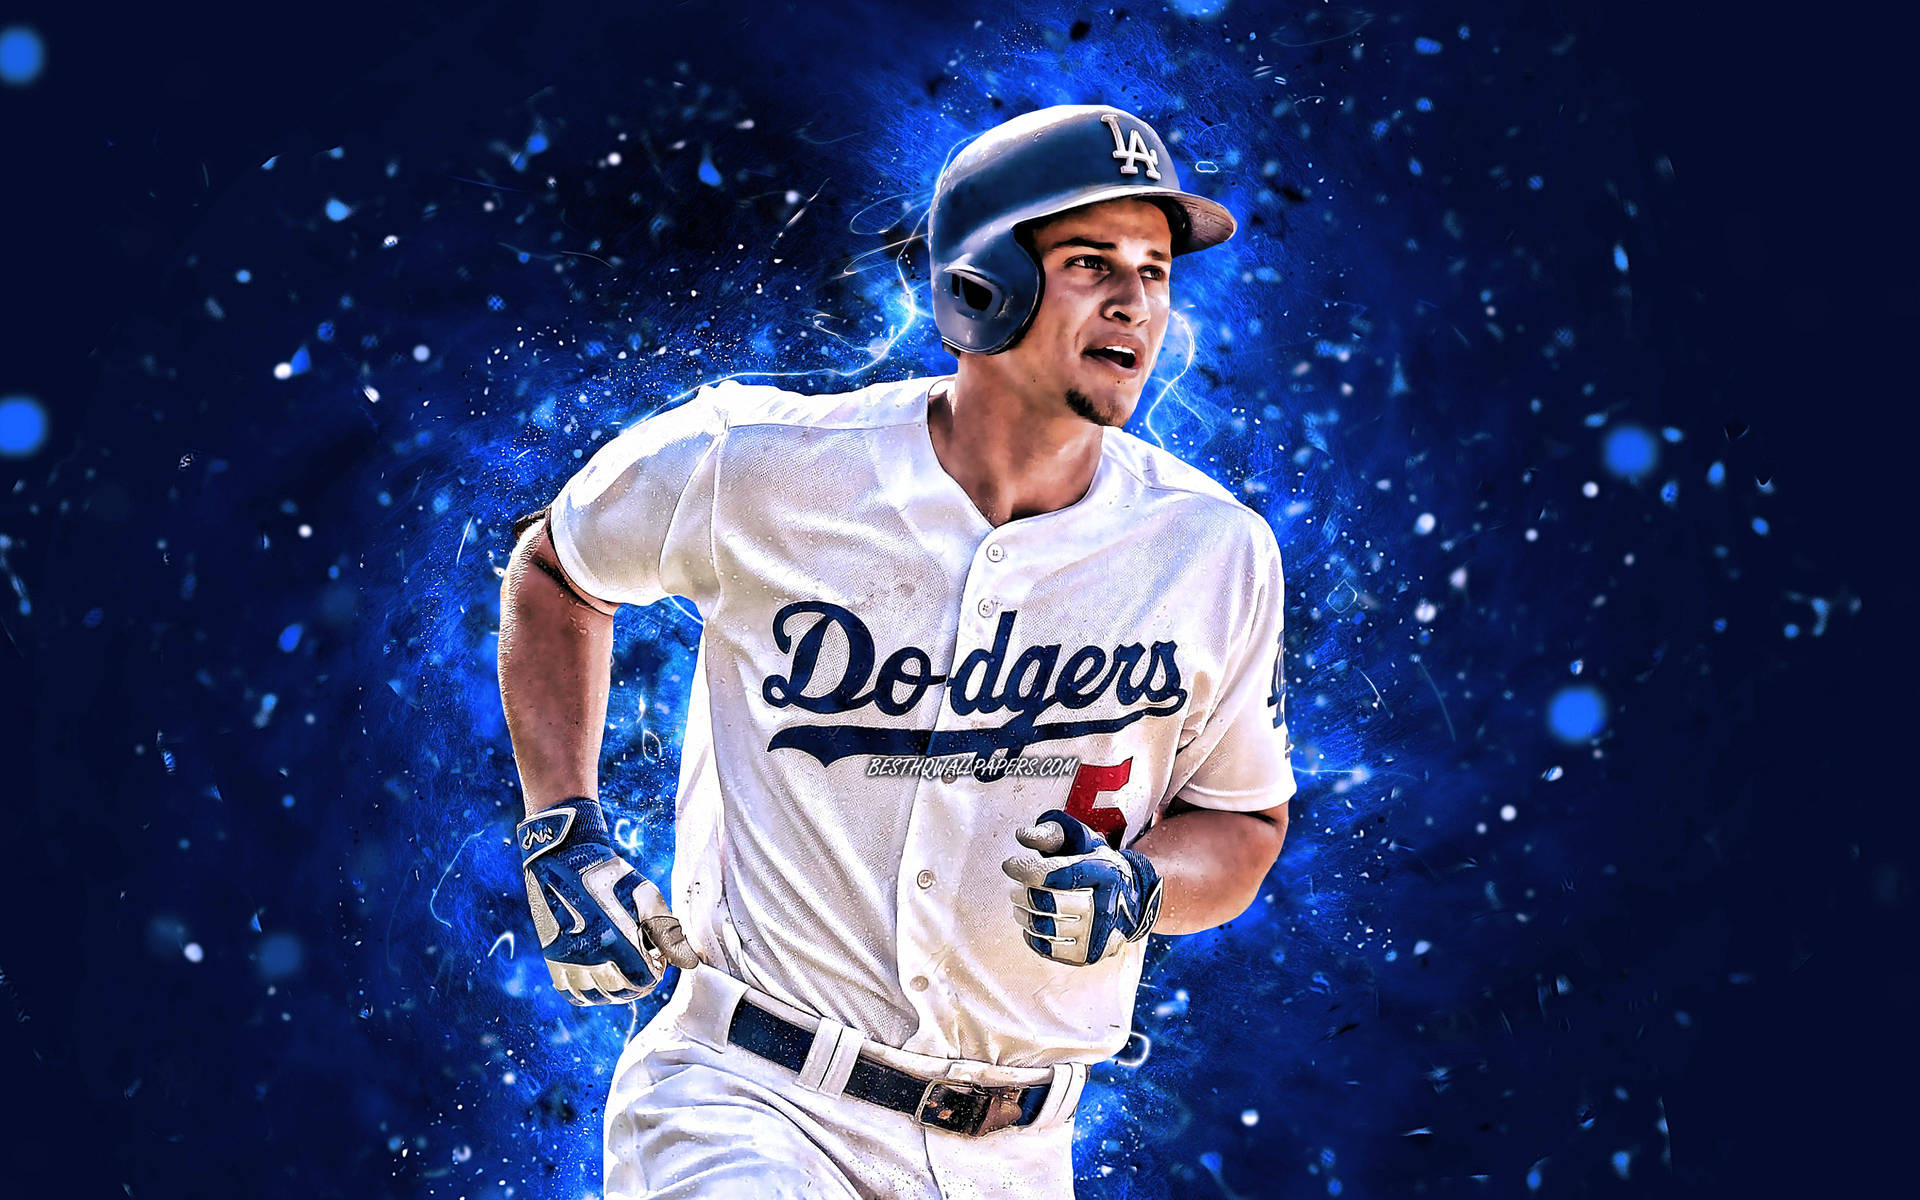 Corey Seager Running With Blue Lights Background